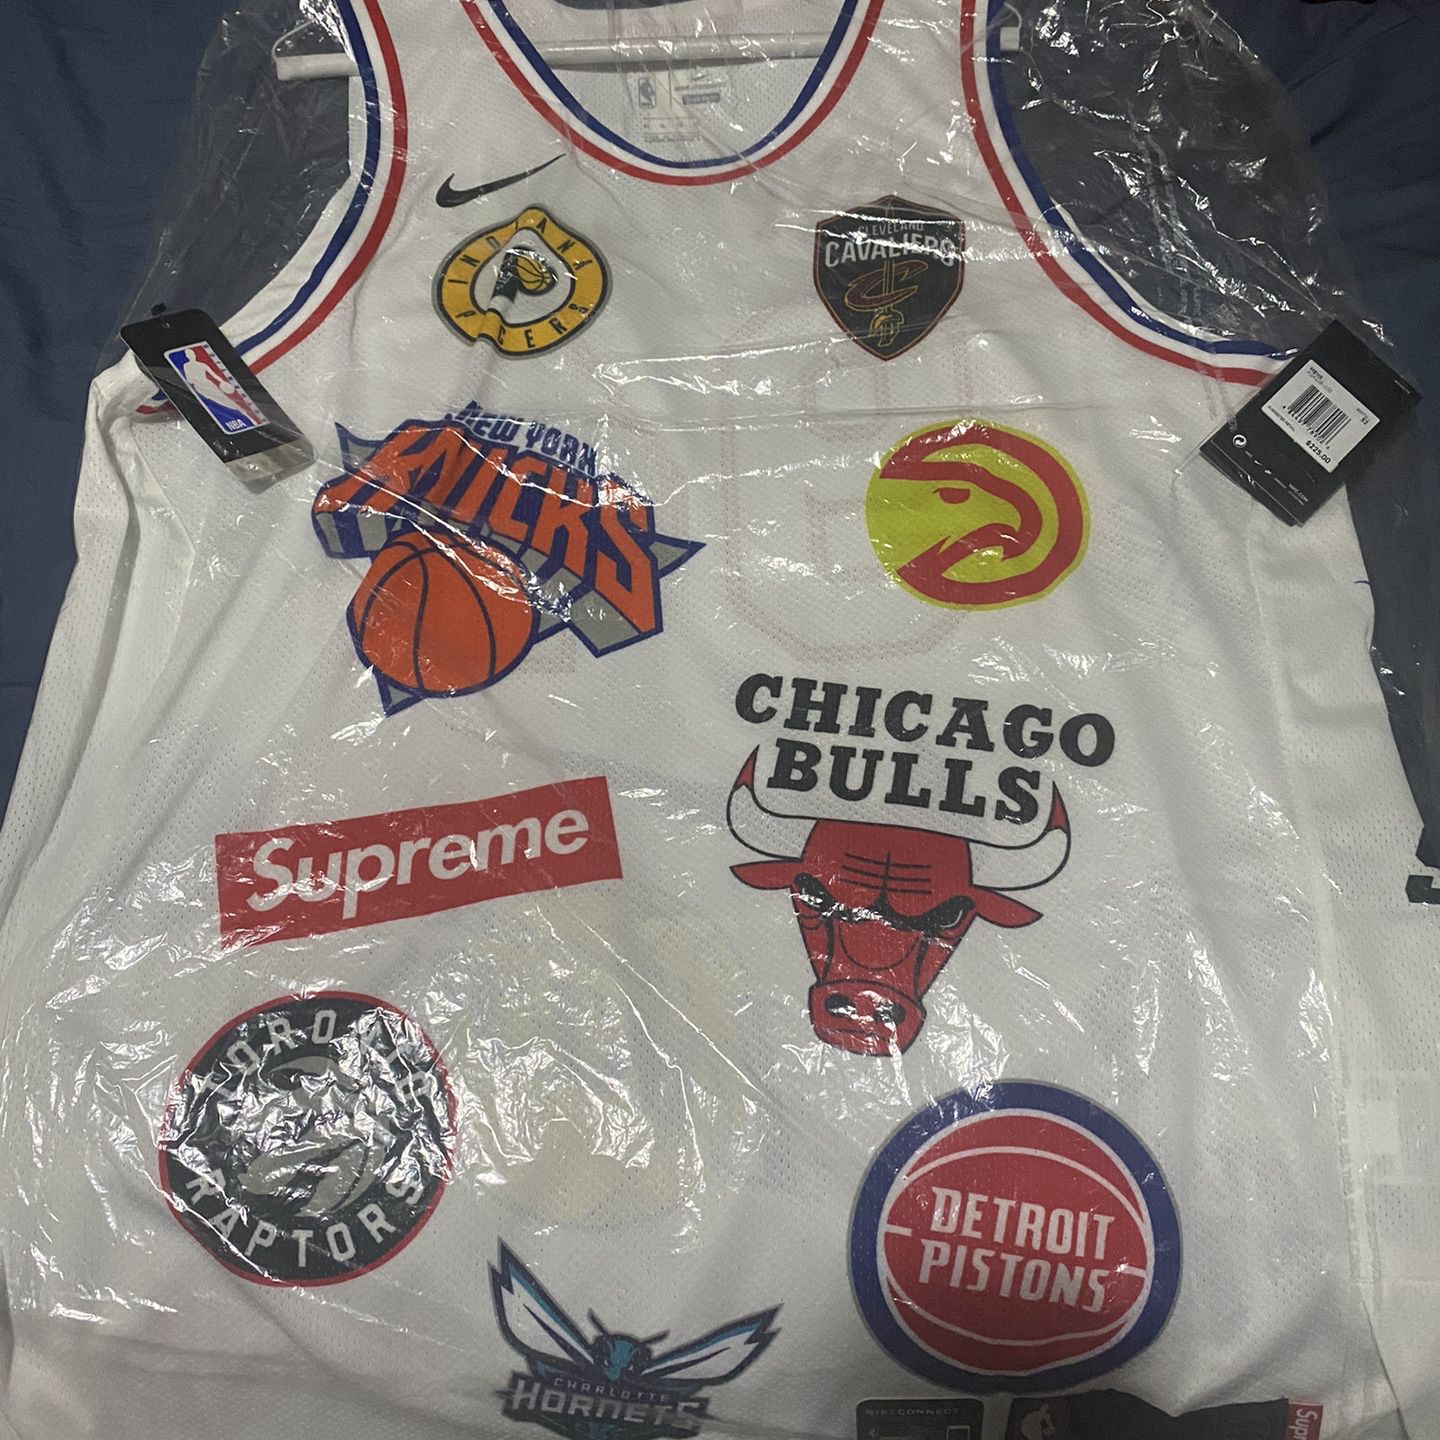 Bape basketball jersey and shorts for Sale in El Cajon, CA - OfferUp